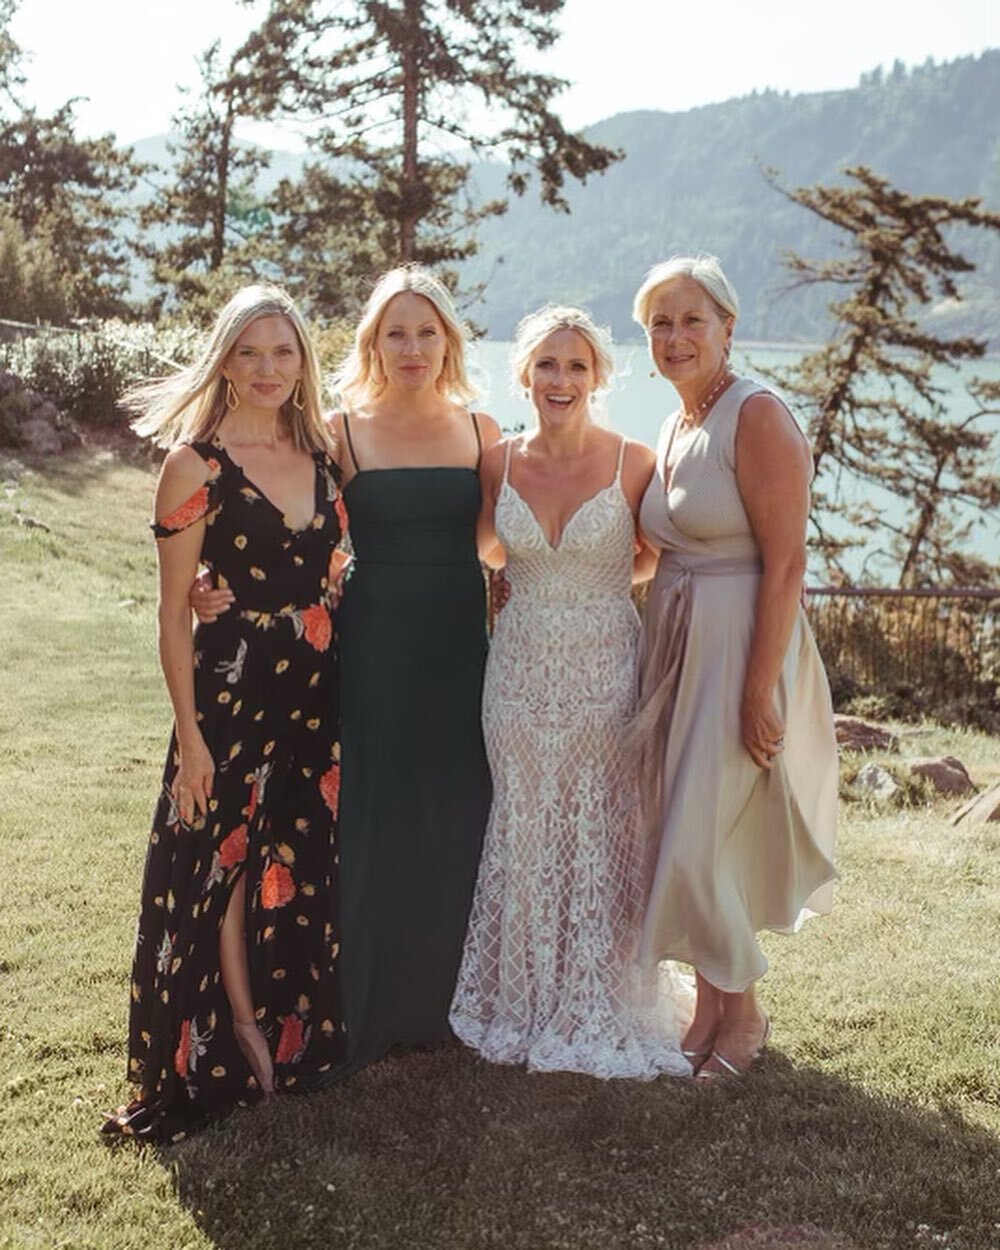 A long awaited epic wedding weekend for my sister cousin filled with love and lots of dancing in the most beautiful setting ❤️🌻🥂 We love you @katgrrr73 @clearyjim ❤️